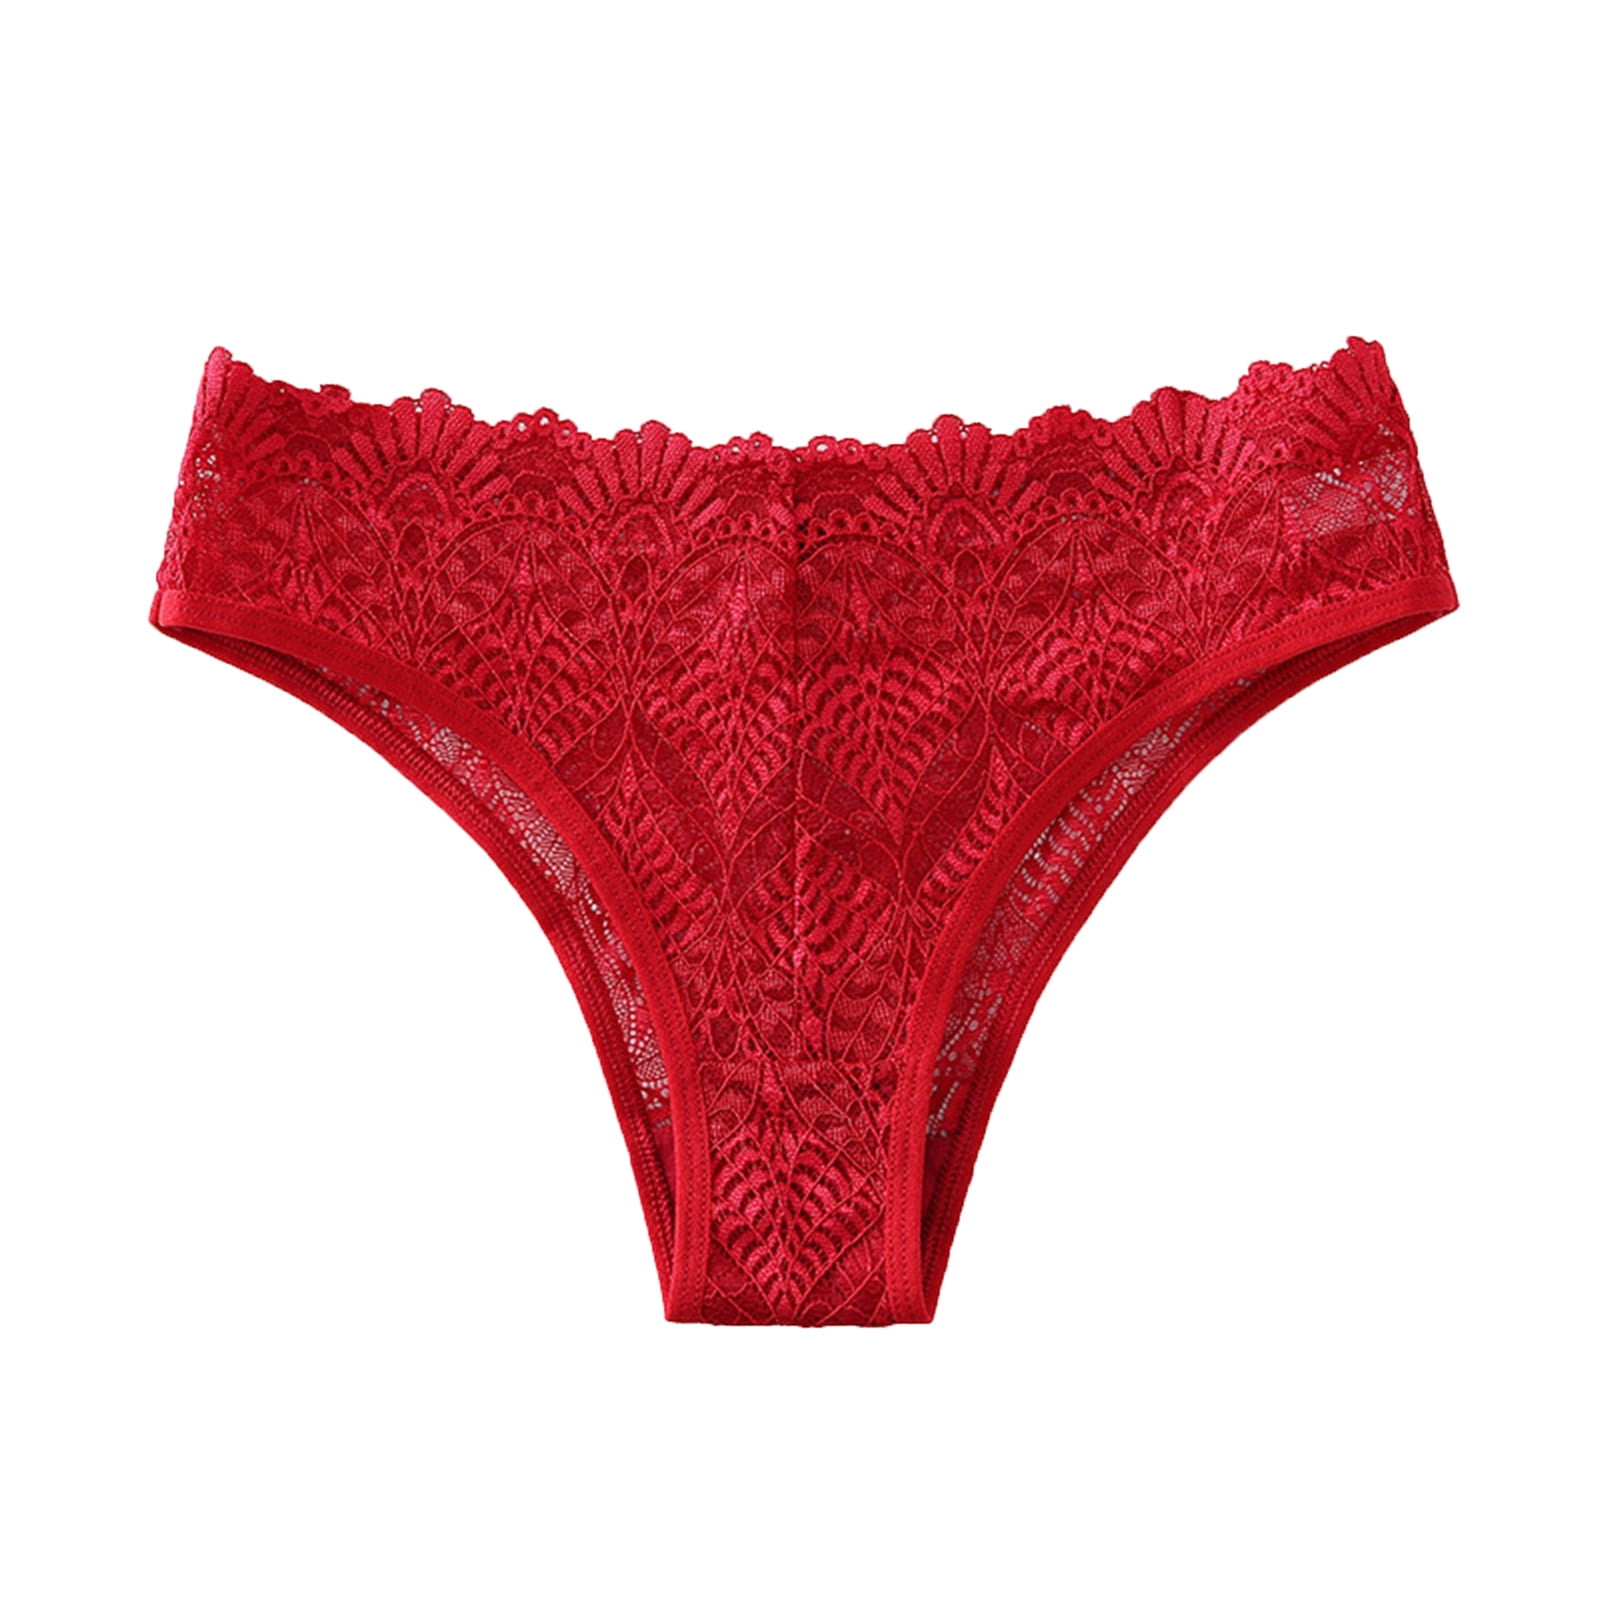 Hfyihgf No Show Panties for Women Seamless T-Back Lace Triangle Low Waist  V-Shape Underwear Sexy See Through G String Pants Tucking Panties Dark Red  M 